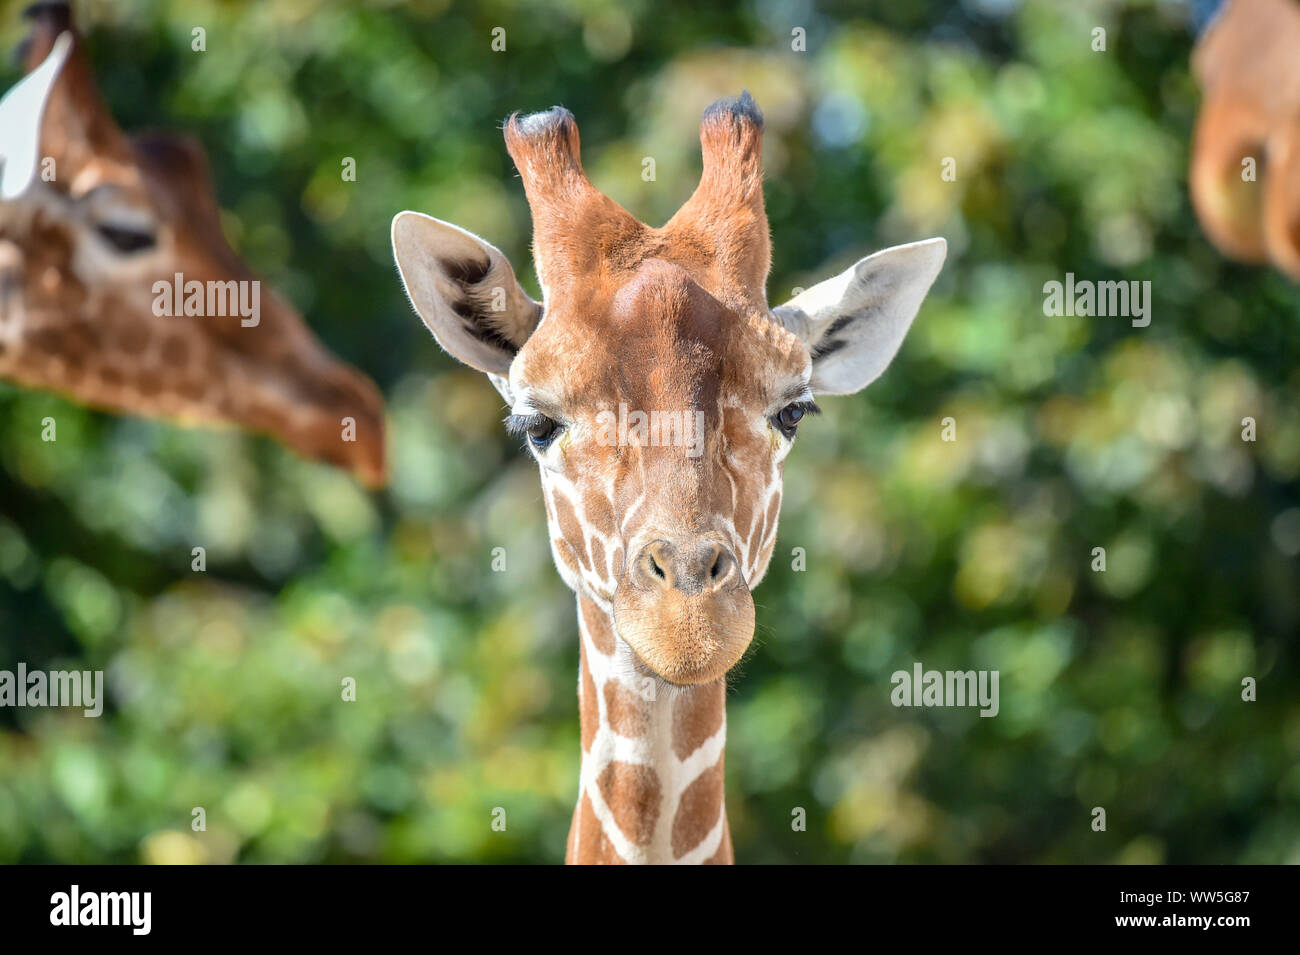 Tico, the 20 month old reticulated giraffe settles into his enclosure at Wild Place Project after transferring from an attraction in Copenhagen, joining fellow giraffes Tom and Dayo in their 1.8-acre exhibit in South Gloucestershire. Stock Photo